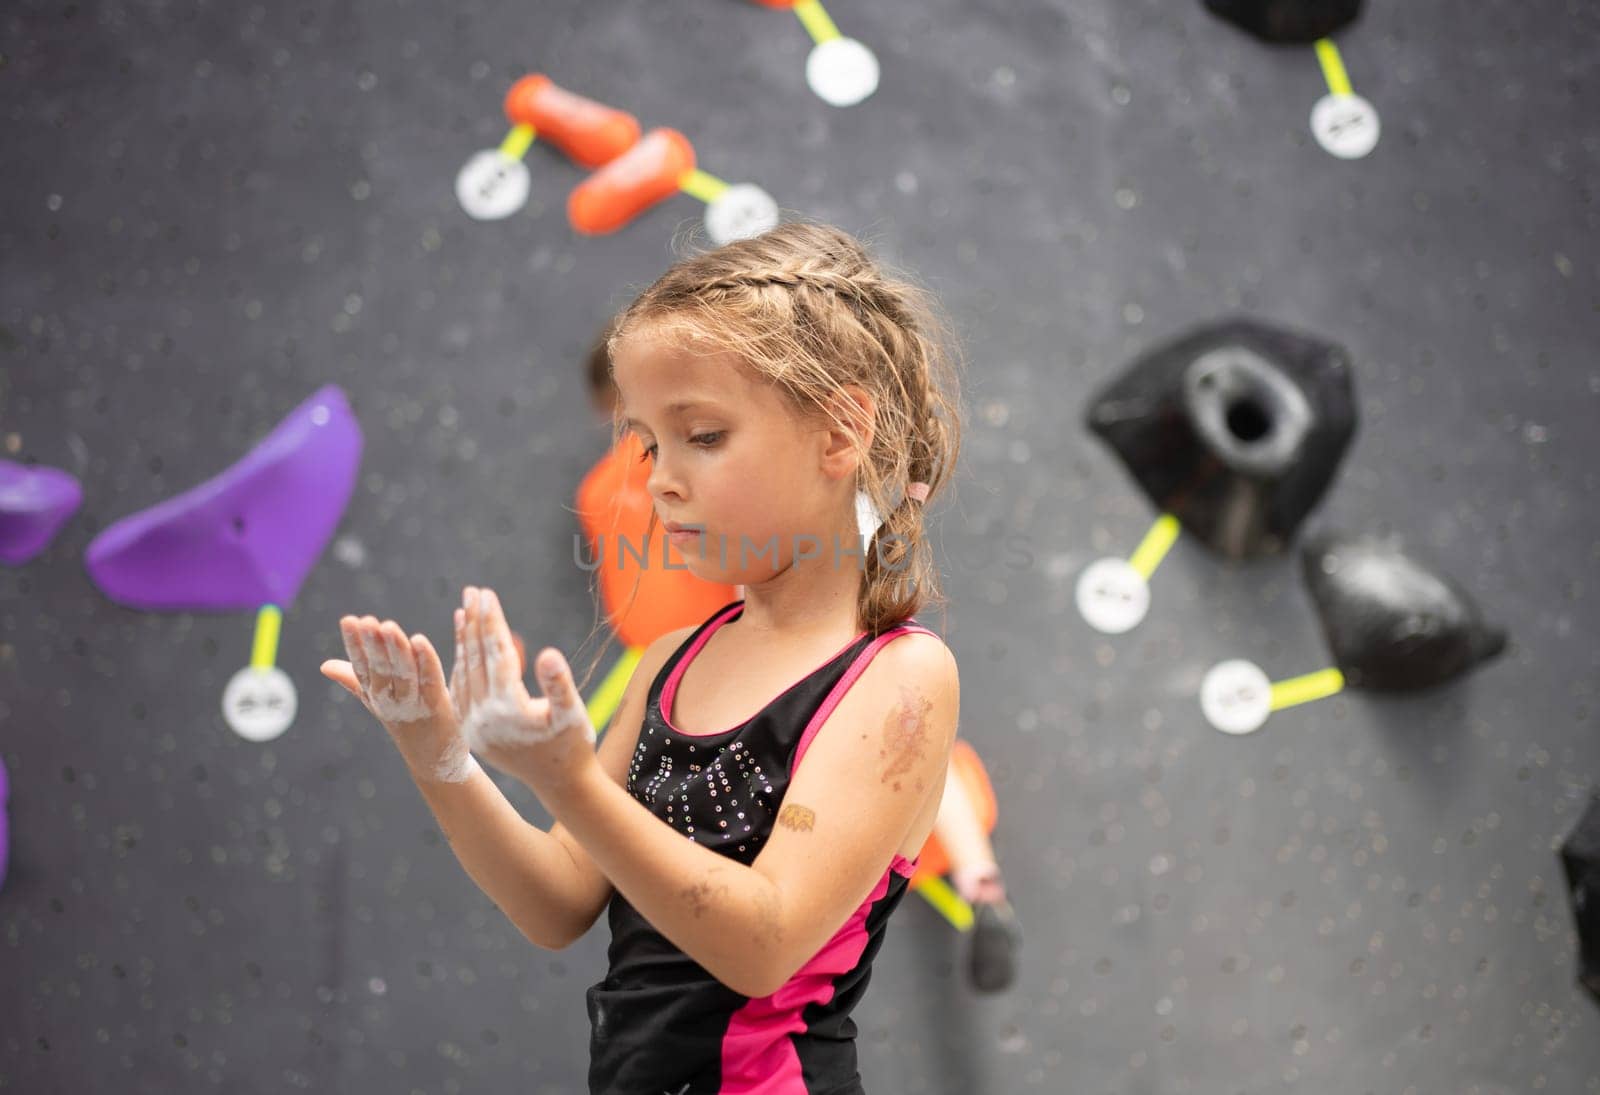 Cute adorable girl climber looking at hands coated with powder chalk magnesium. Determined child preparing for rock climbing in sports center. Fitness and healthy lifestyle.